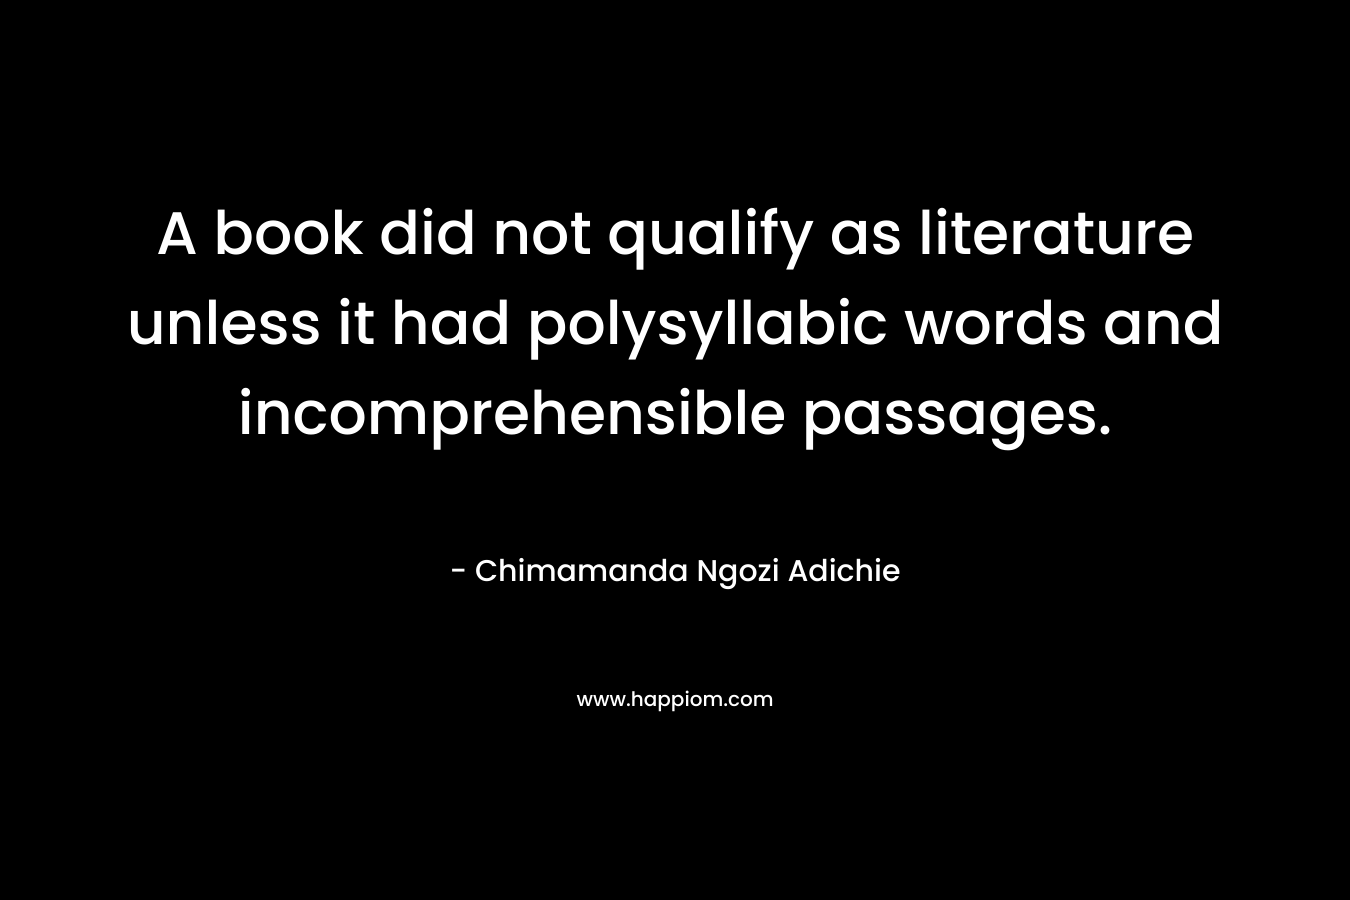 A book did not qualify as literature unless it had polysyllabic words and incomprehensible passages. – Chimamanda Ngozi Adichie